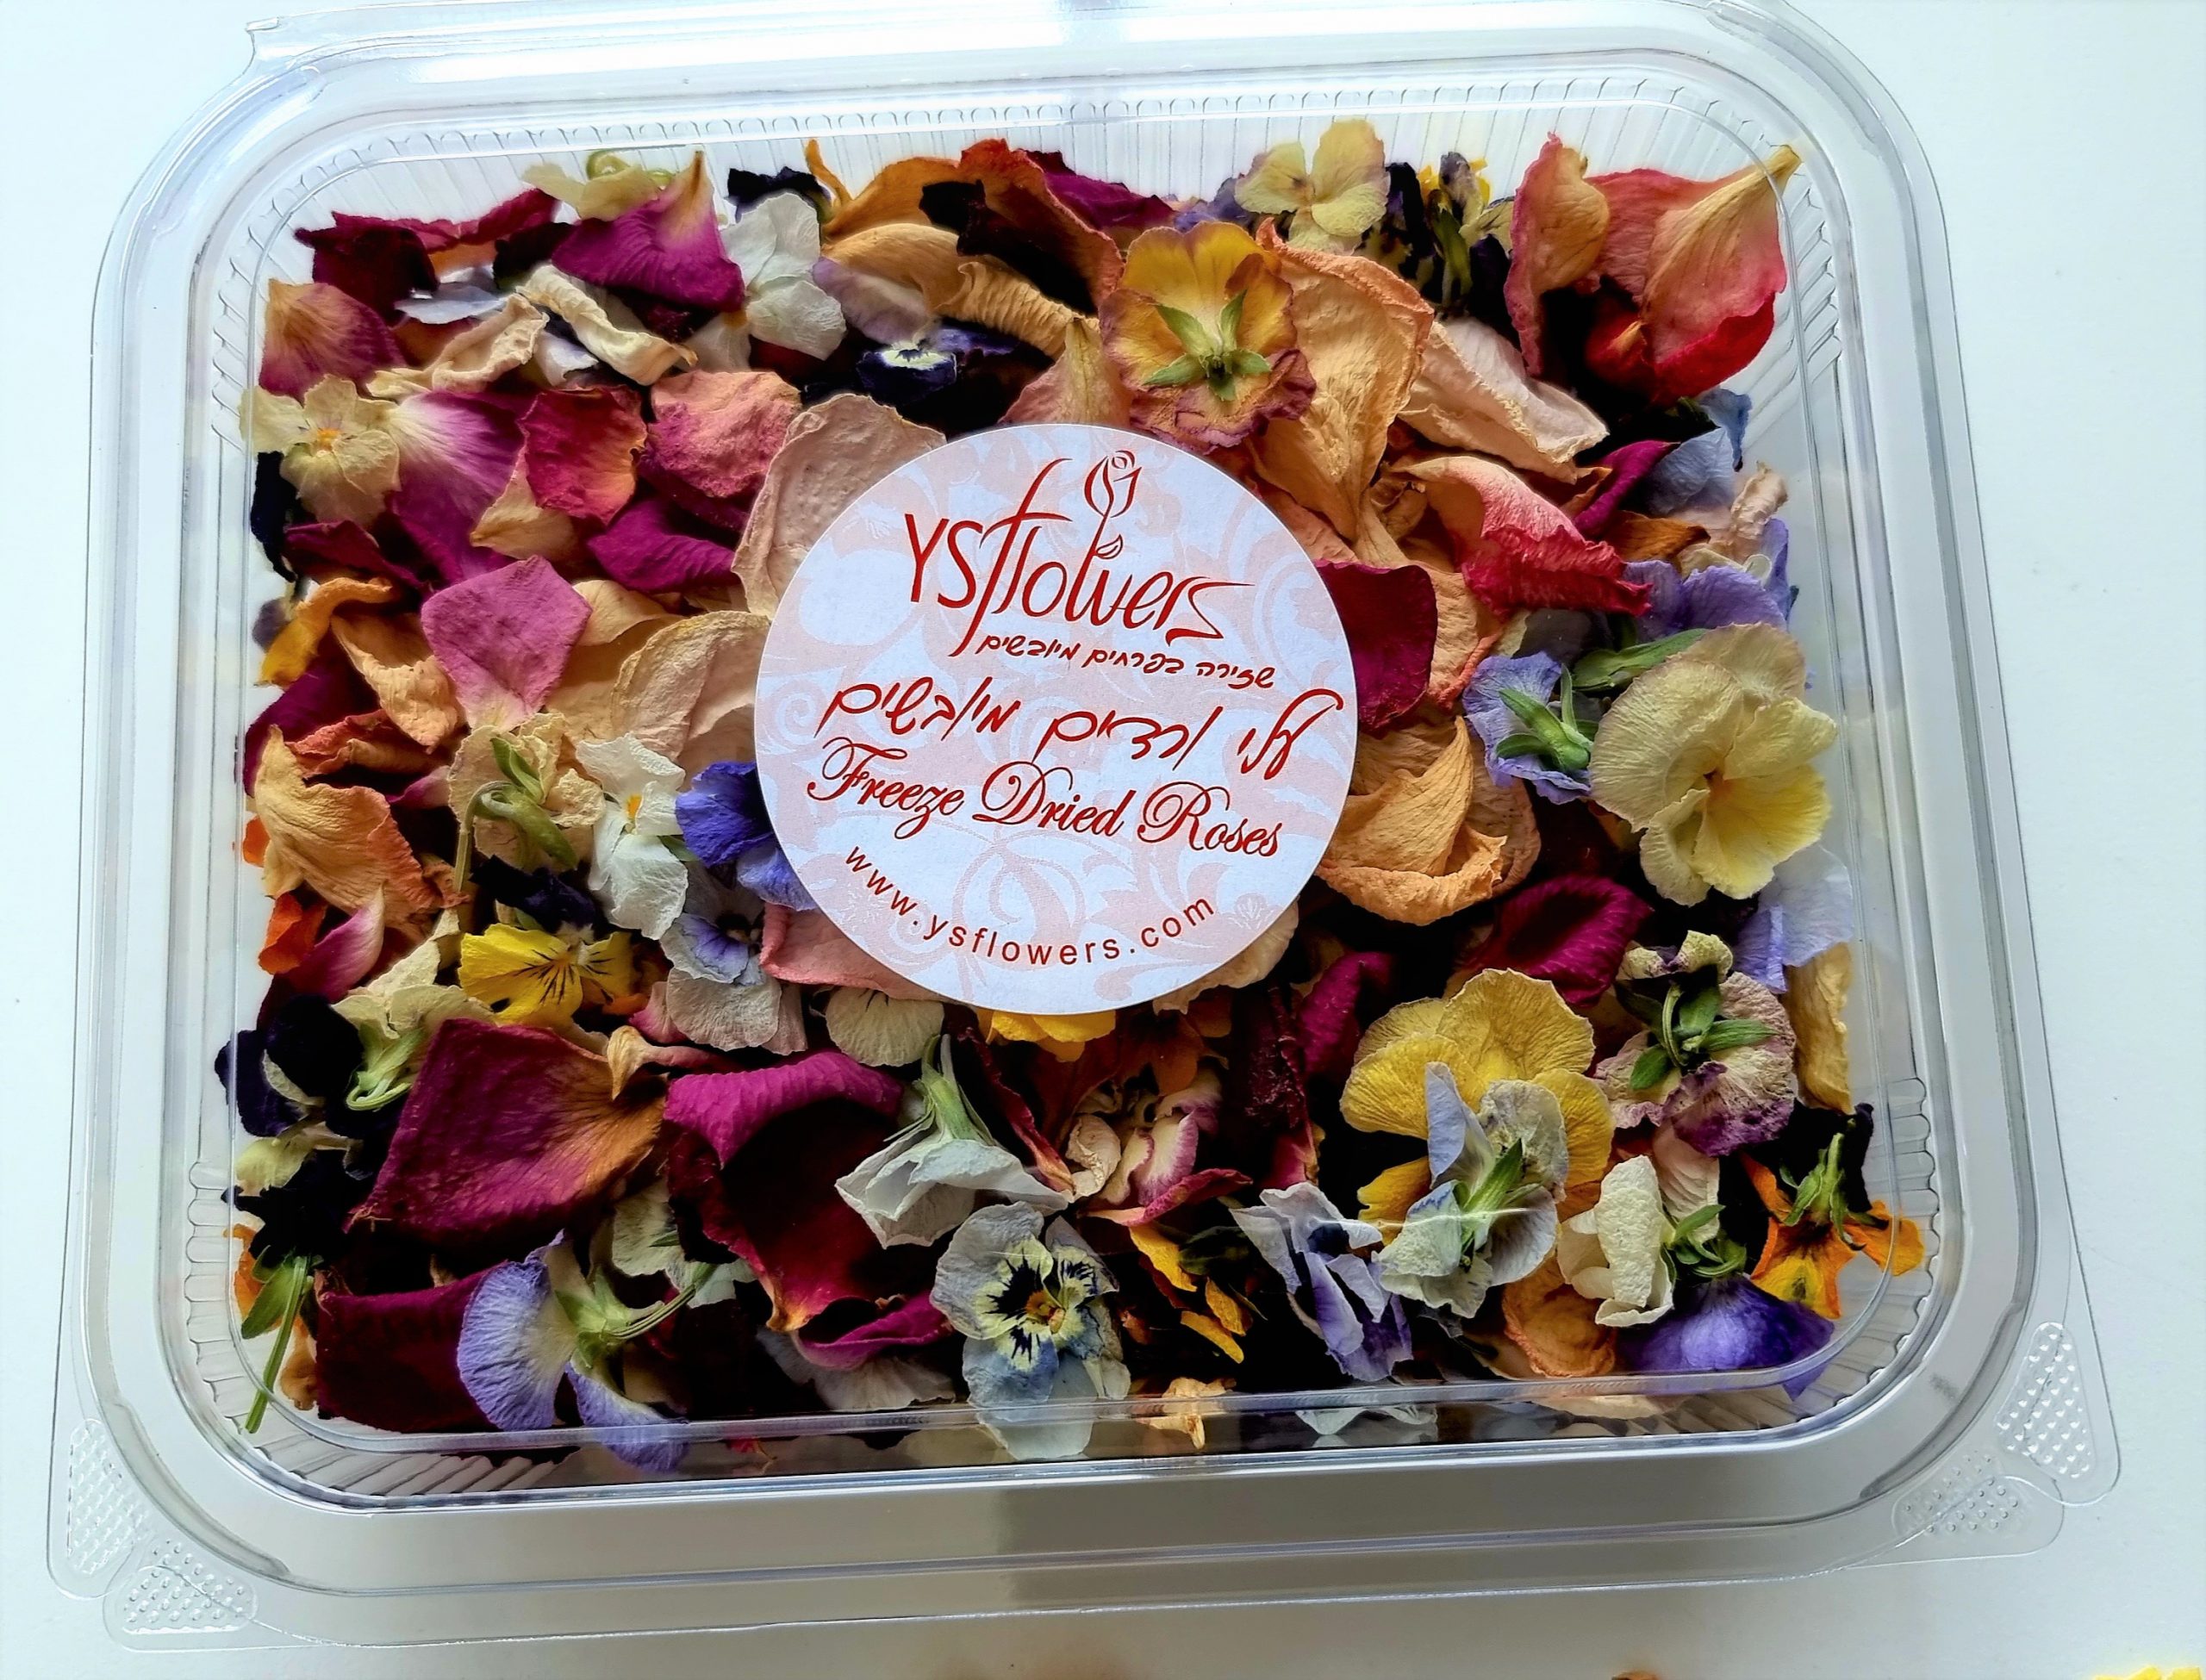 Dried rose petals with dried pansies.